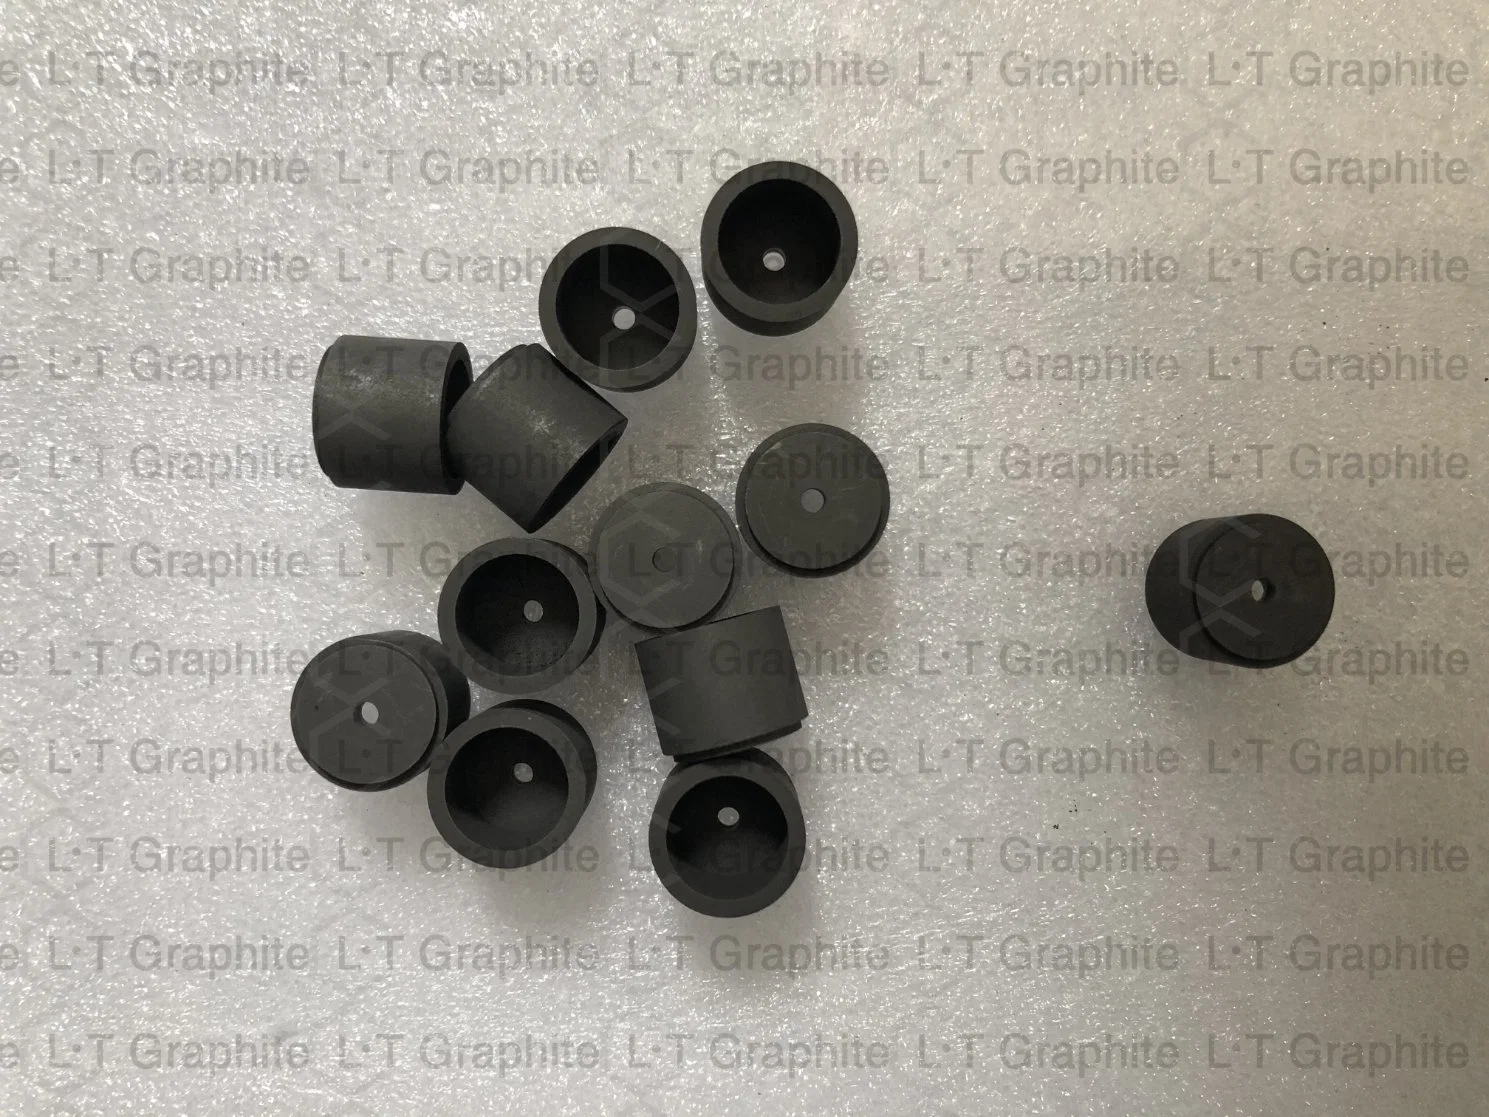 Fine-Grain High Purity Carbon Graphite Block Products